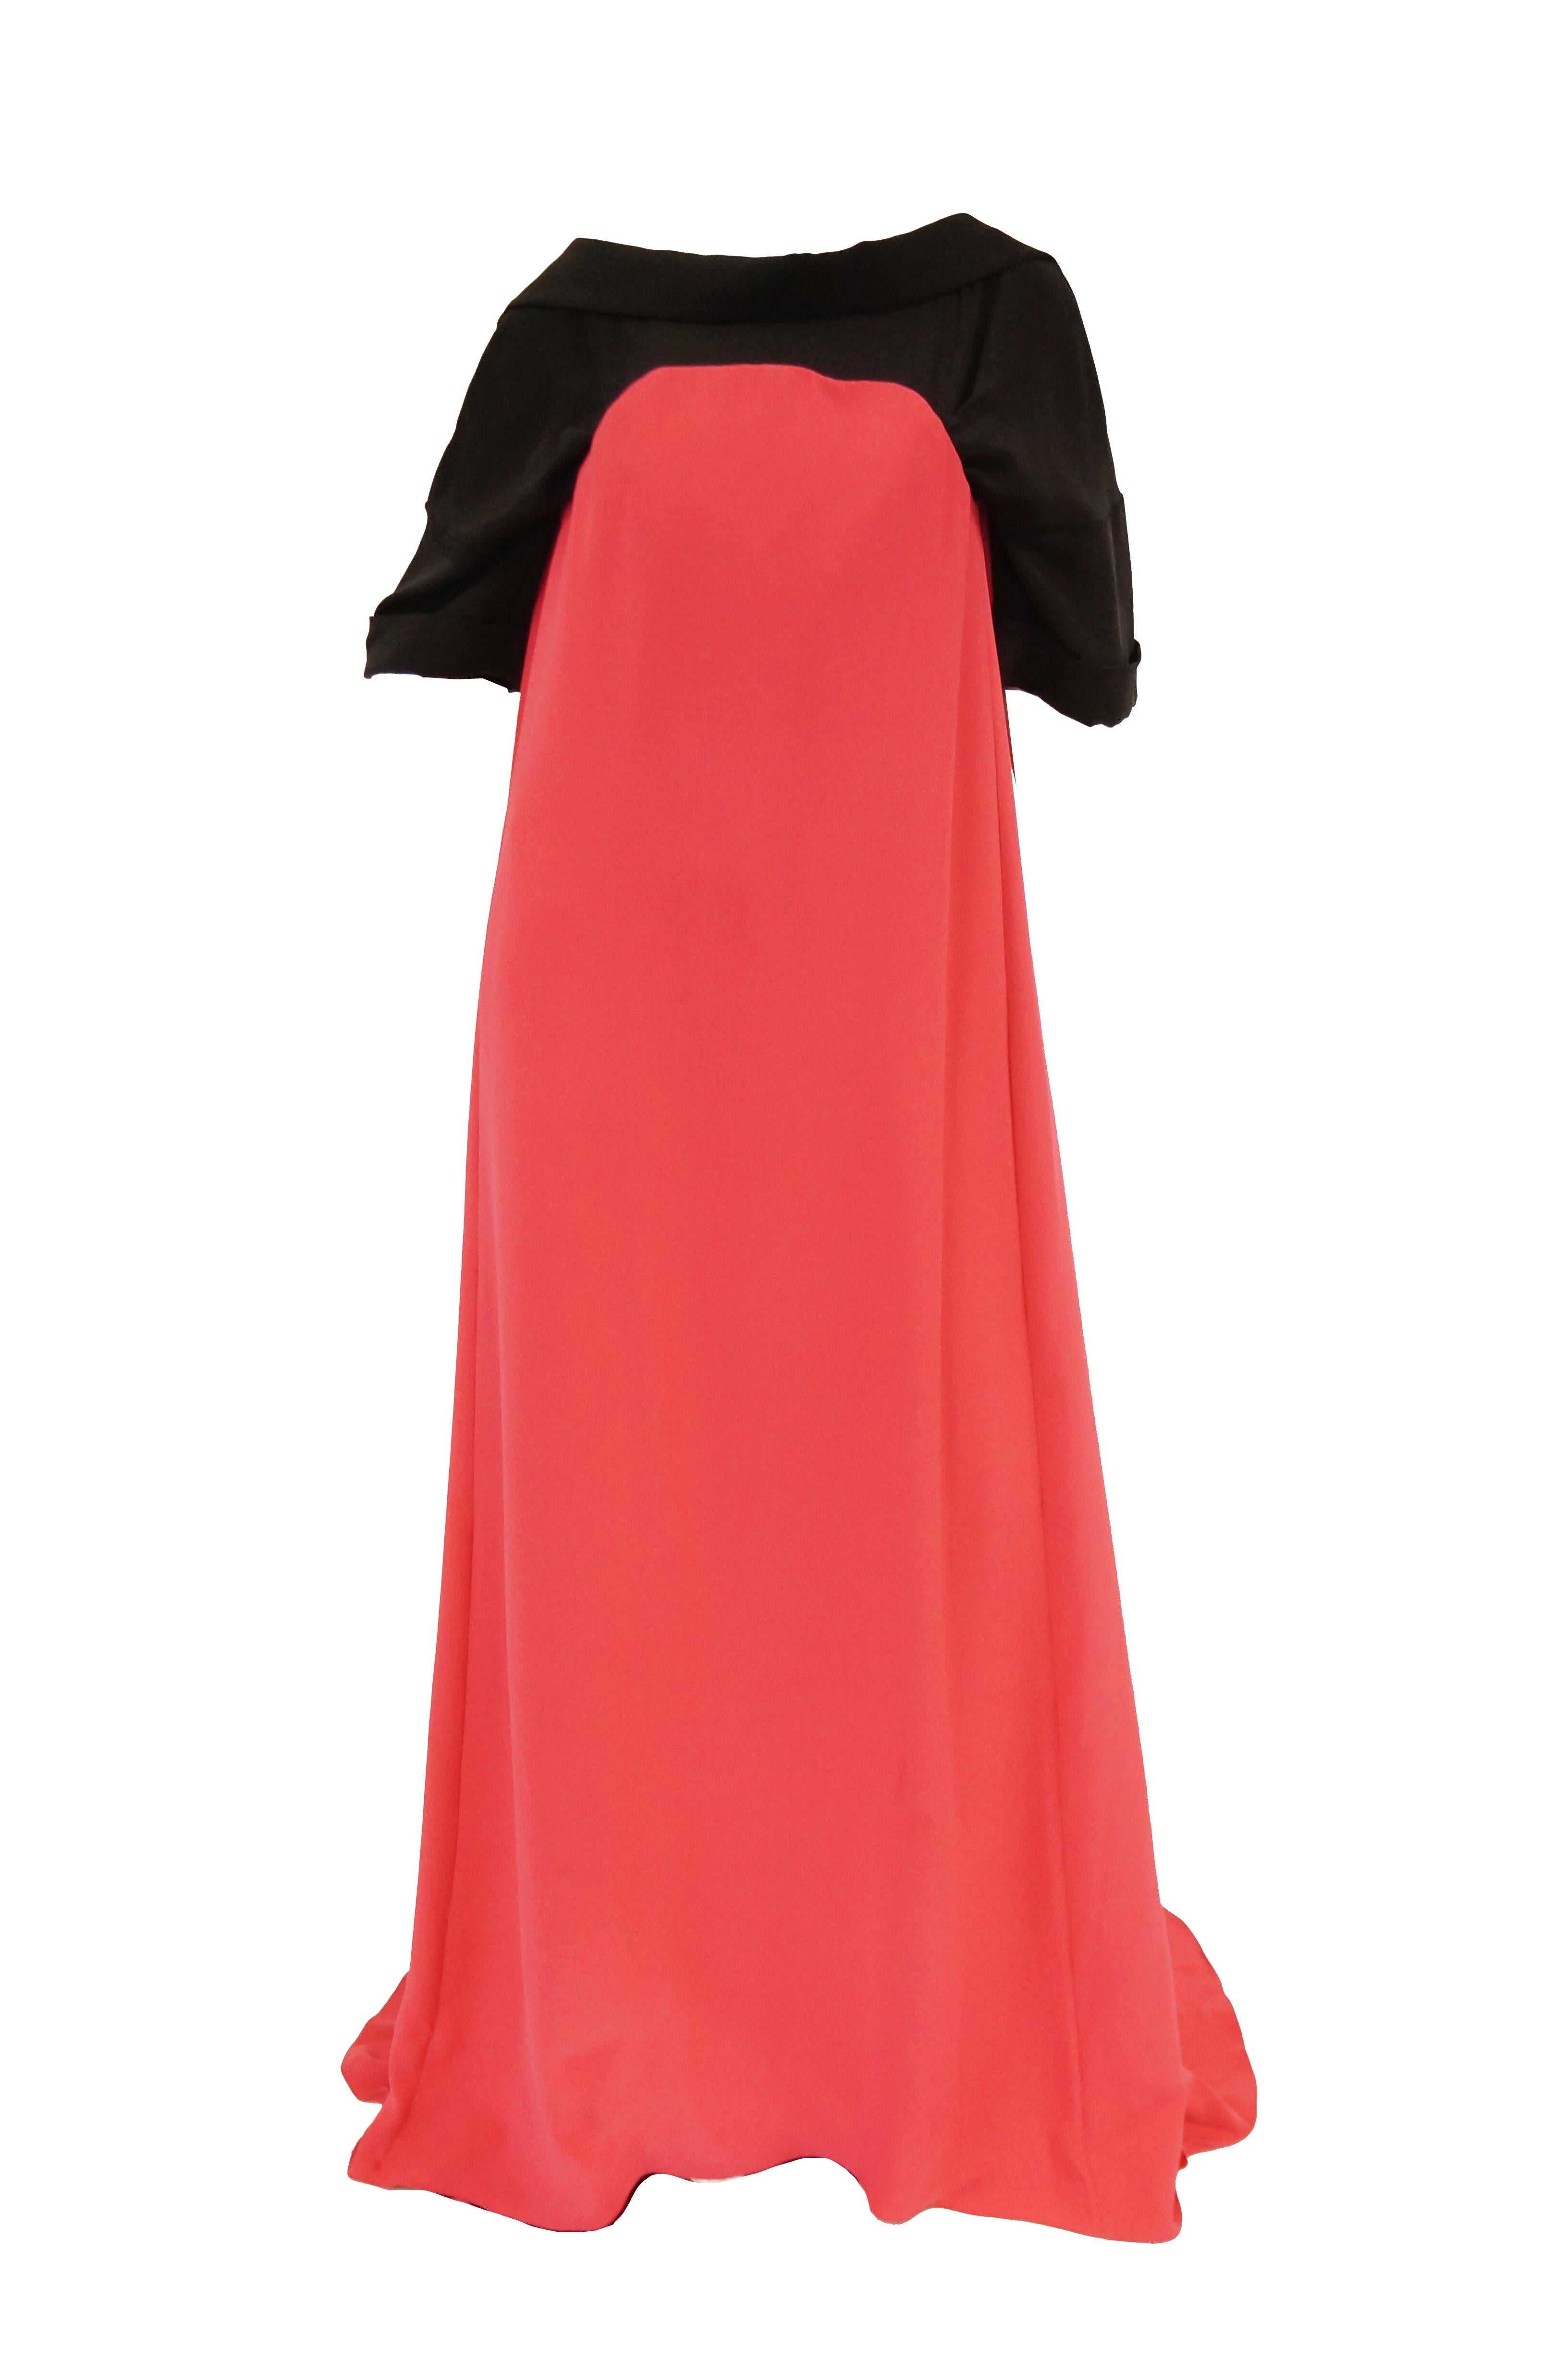 Absolutely incredible magenta pink and black evening dress by Oscar de la Renta. The dramatic dress is composed of two connected parts. The black base dress with a wide bateau neckline and loose sleeves that fall just above the elbow, as well as a